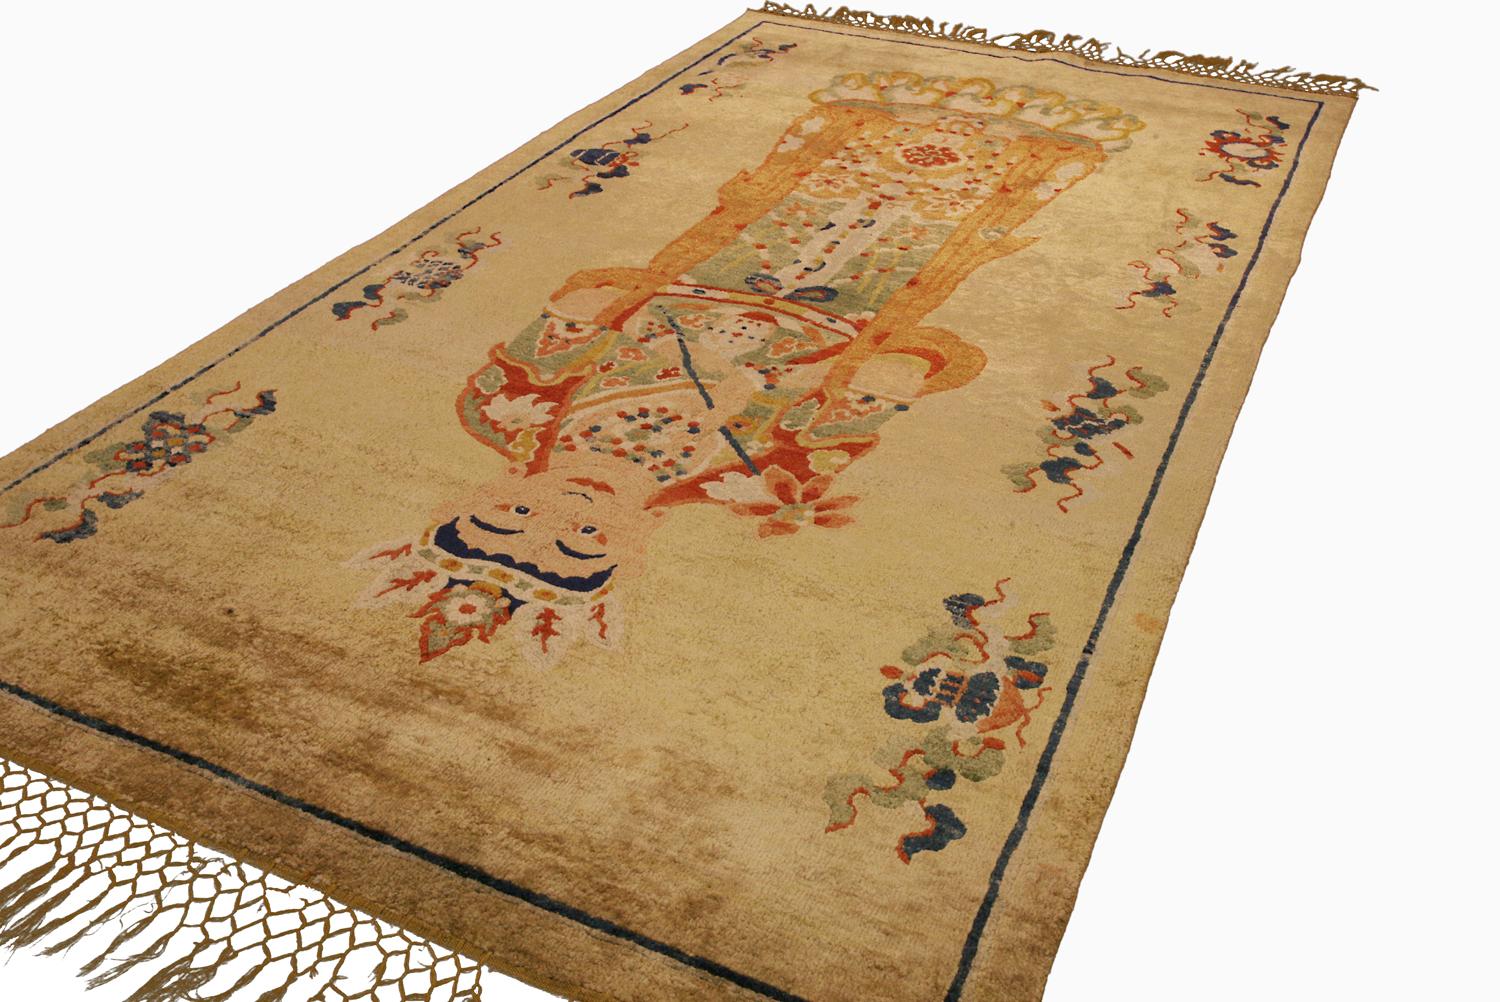 This is a highly unique silk Chinese pictorial rug woven during the end of the 19th century circa 1890's and measures 223 X 123CM in size. This rug shows a member of the royal family set on the royal gold background color surrounded by traditional